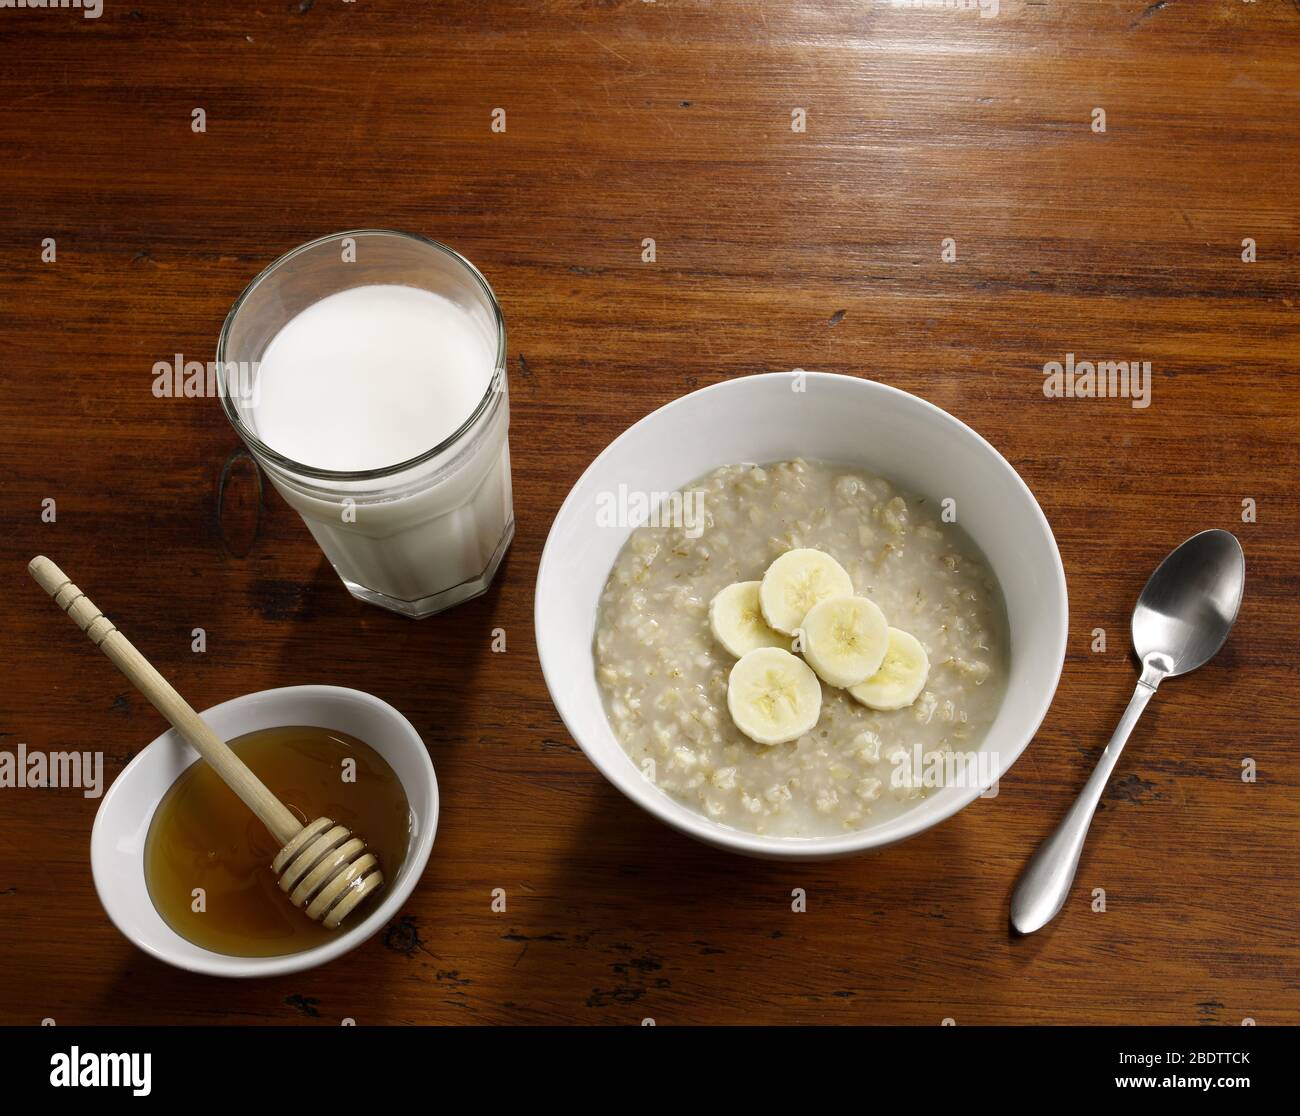 Bowl of breakfast cereal Stock Photo